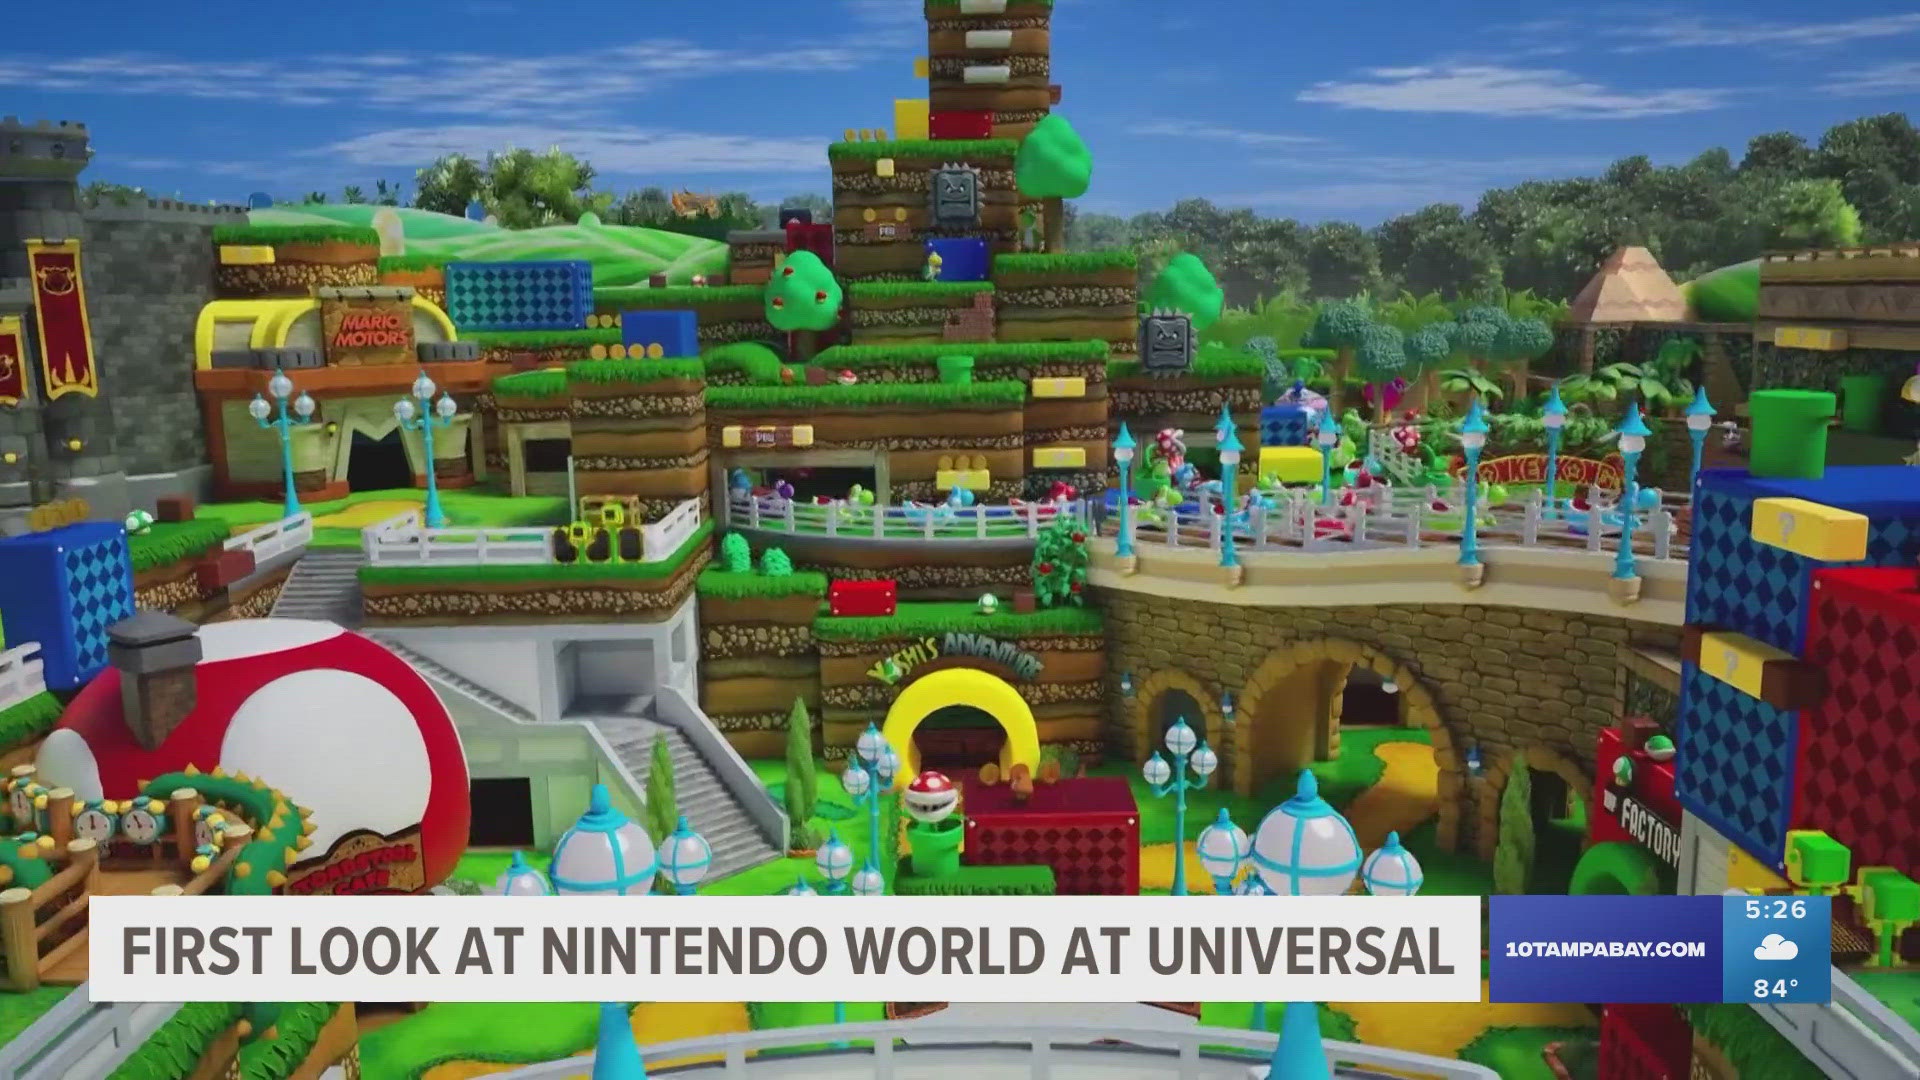 The immersive experience featuring characters from Super Mario Land and Donkey Kong Country is set to open in 2025.